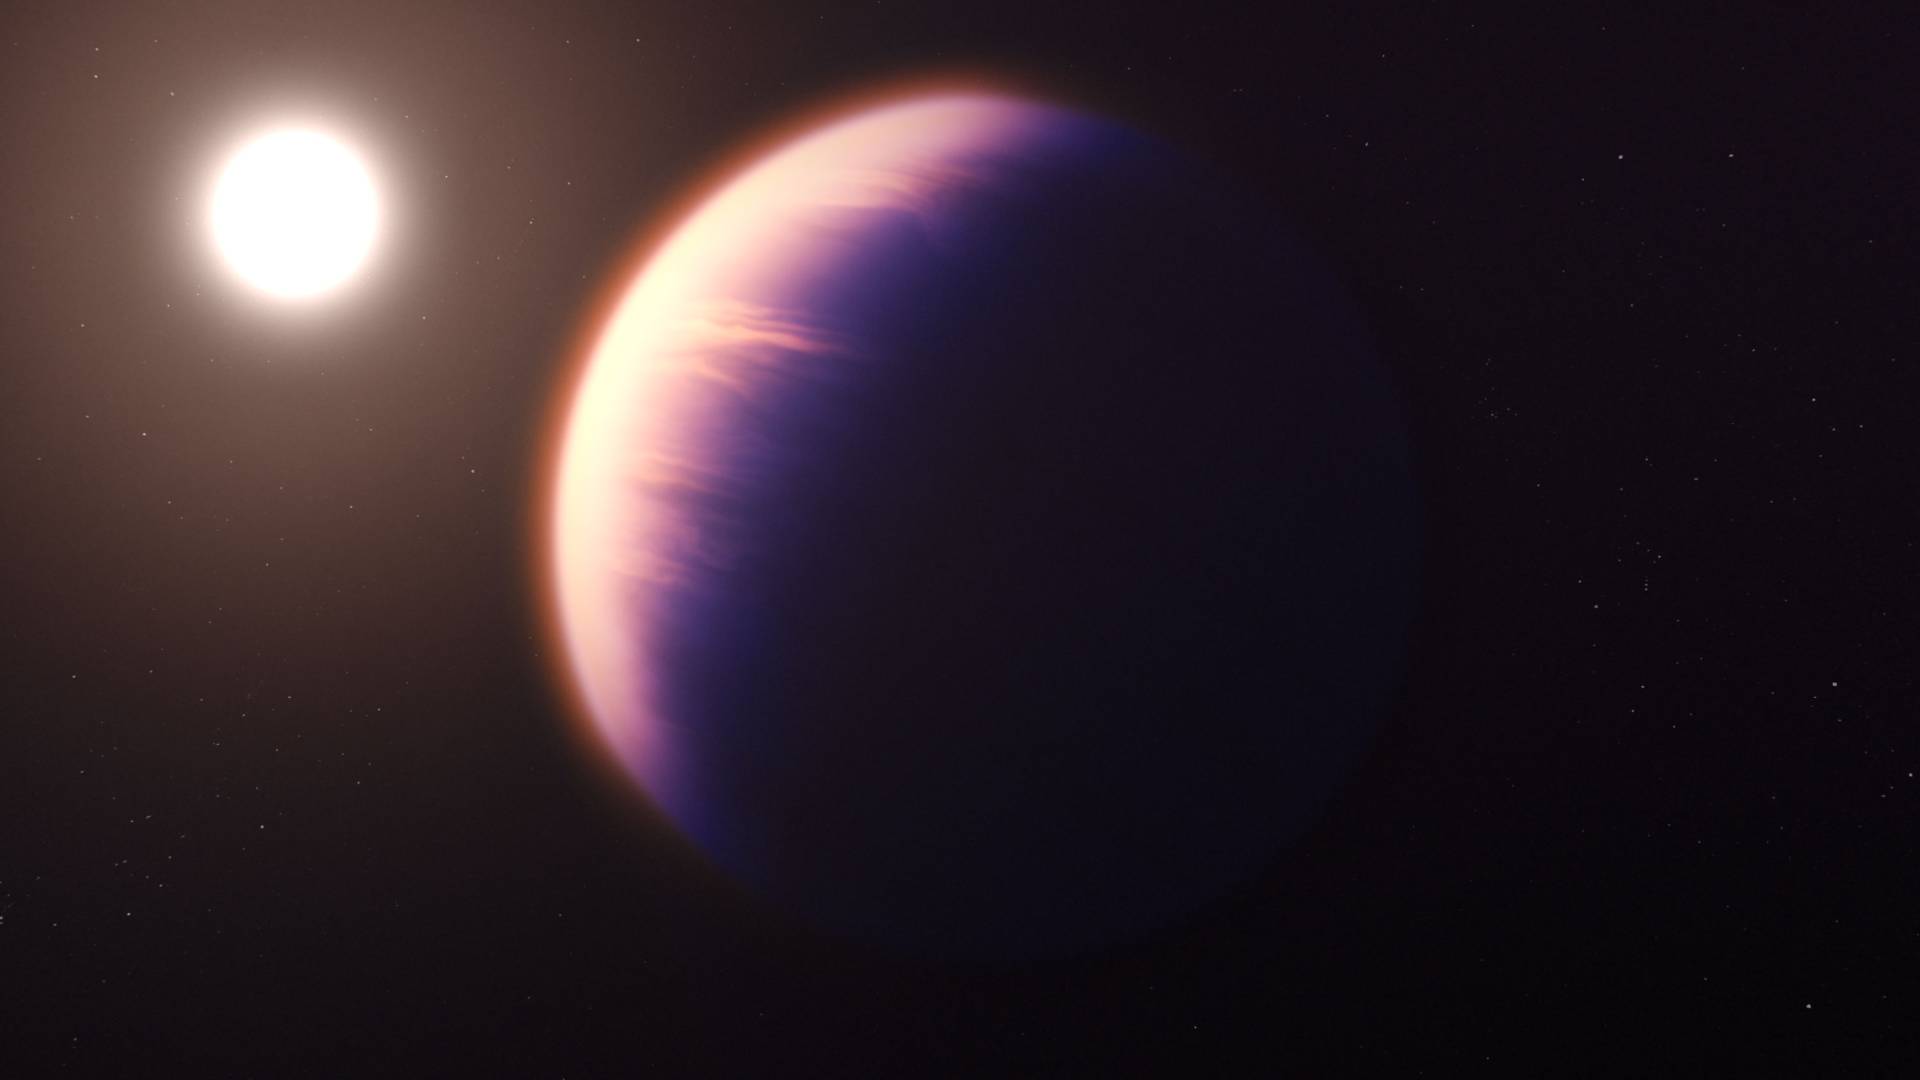 A planet glows in the light of a nearby sun.